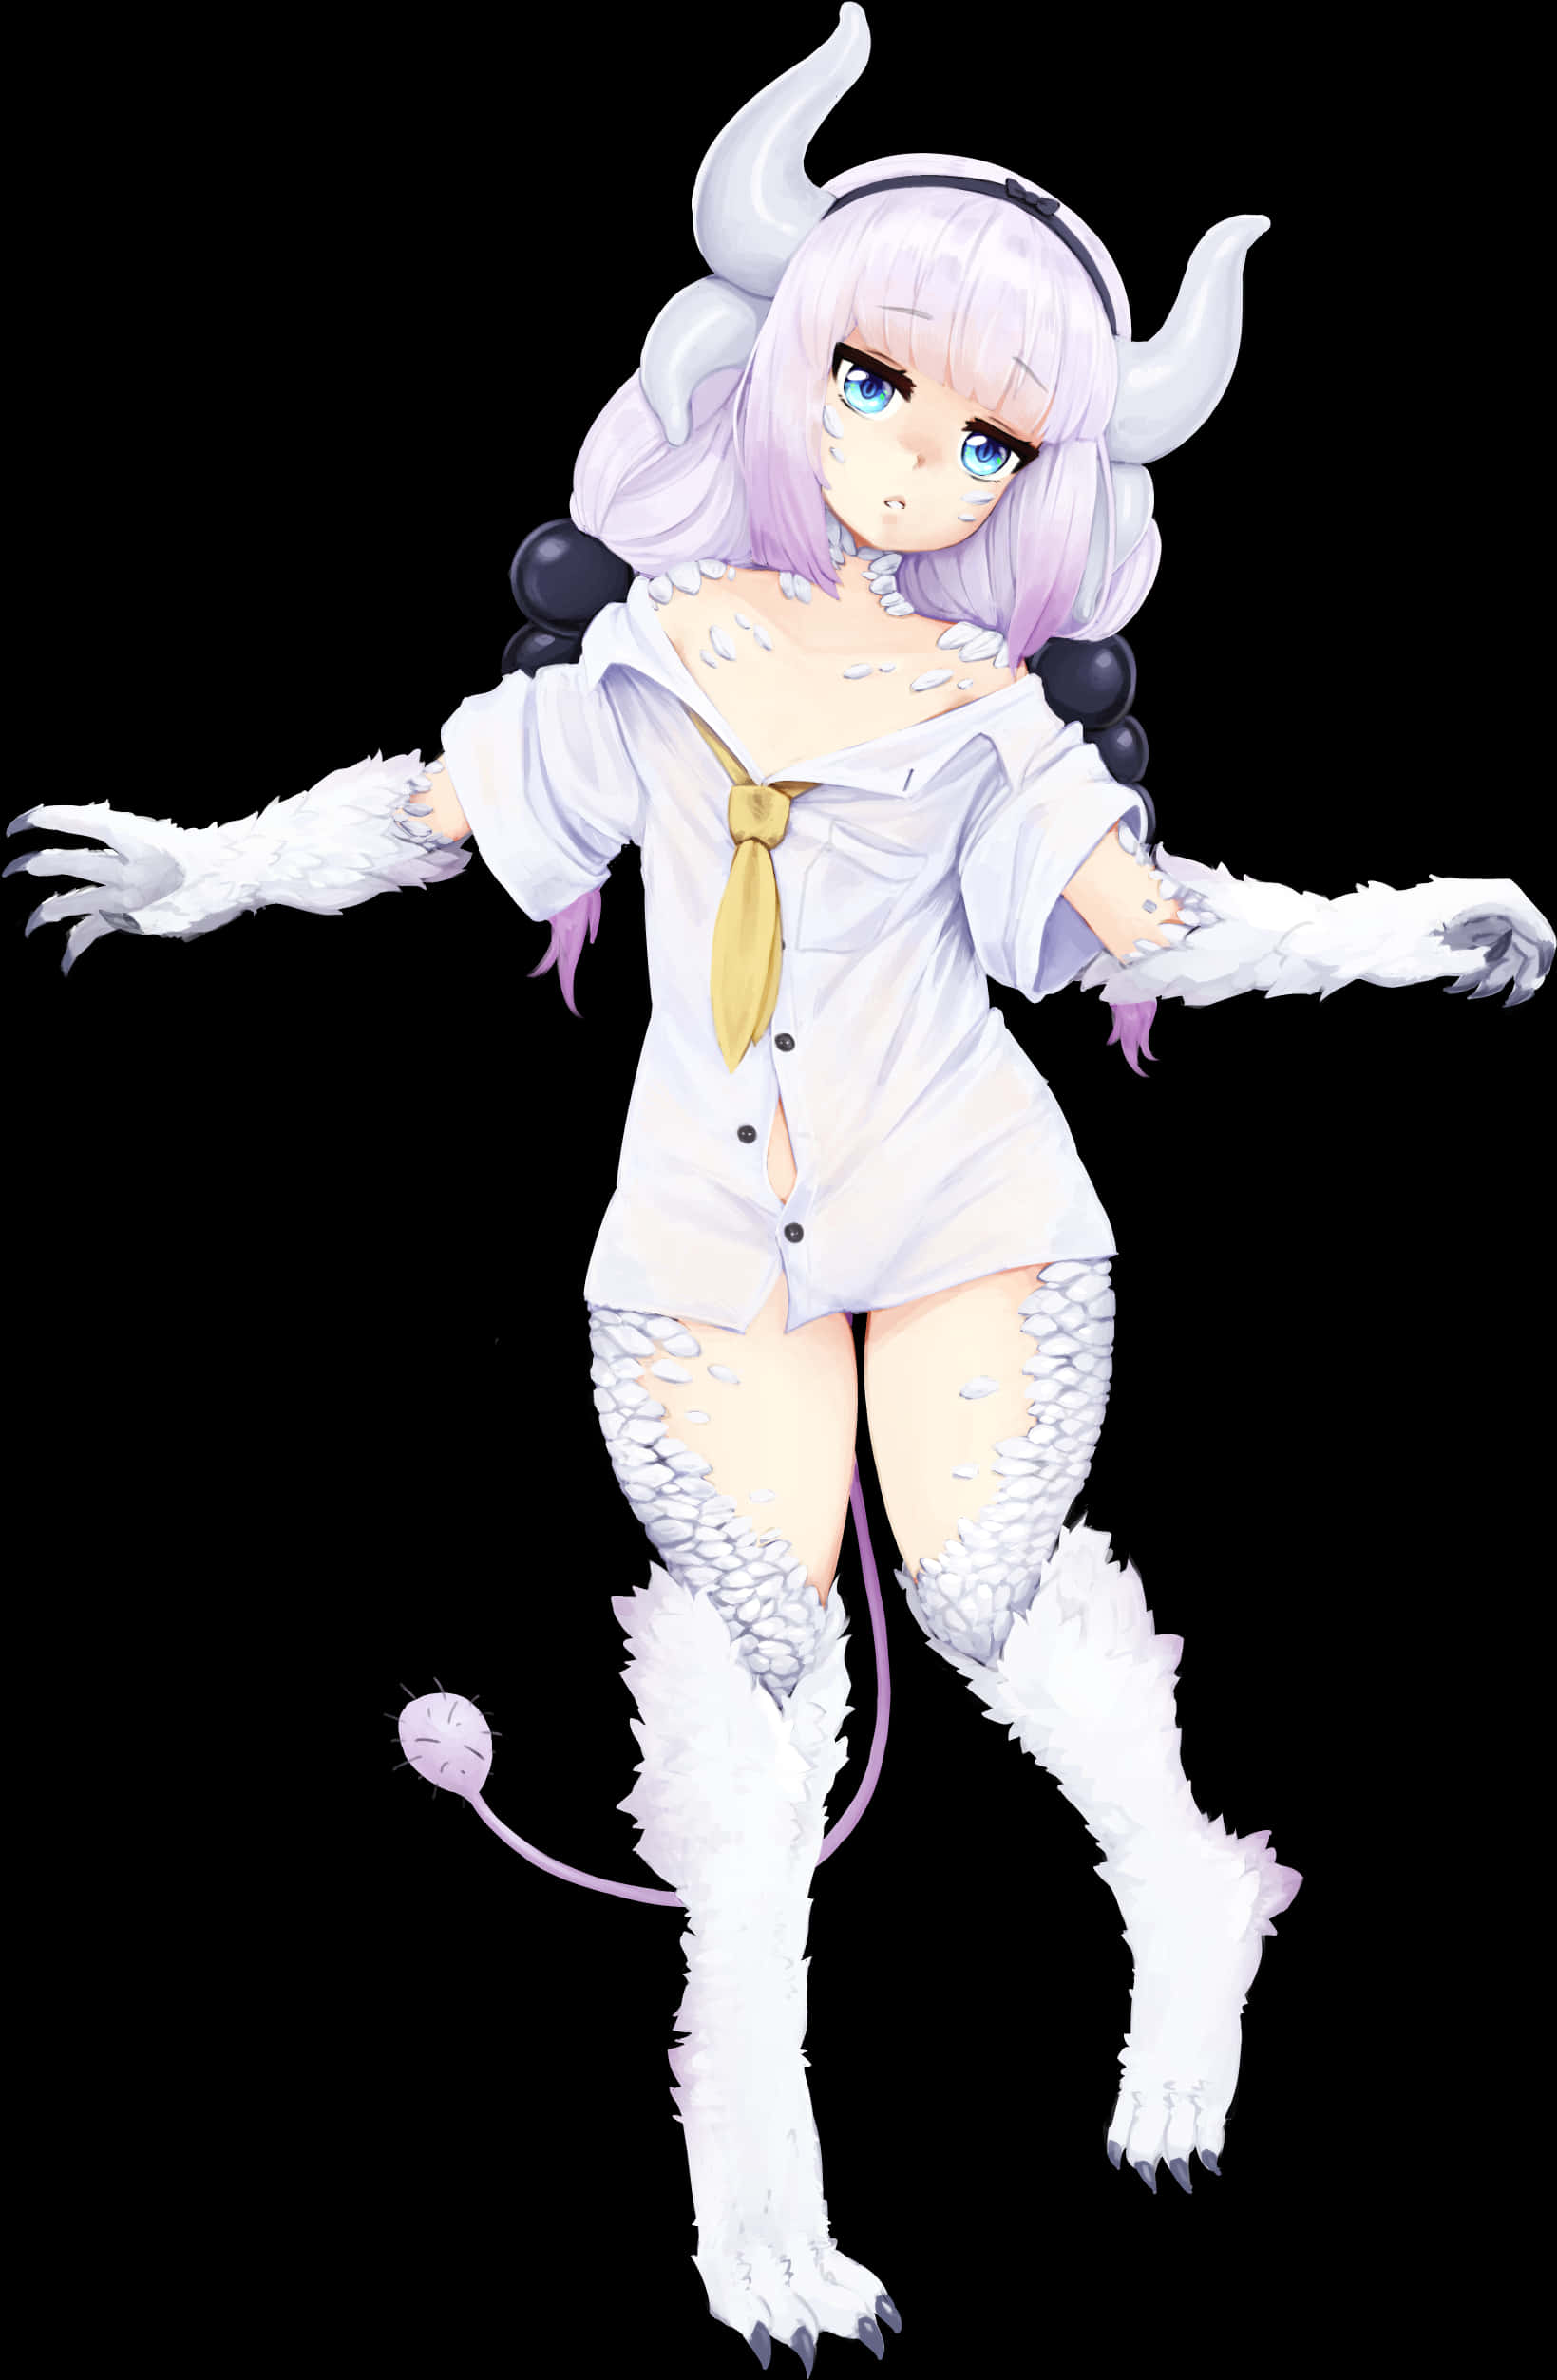 A Cartoon Of A Girl With Long Hair And White Fur